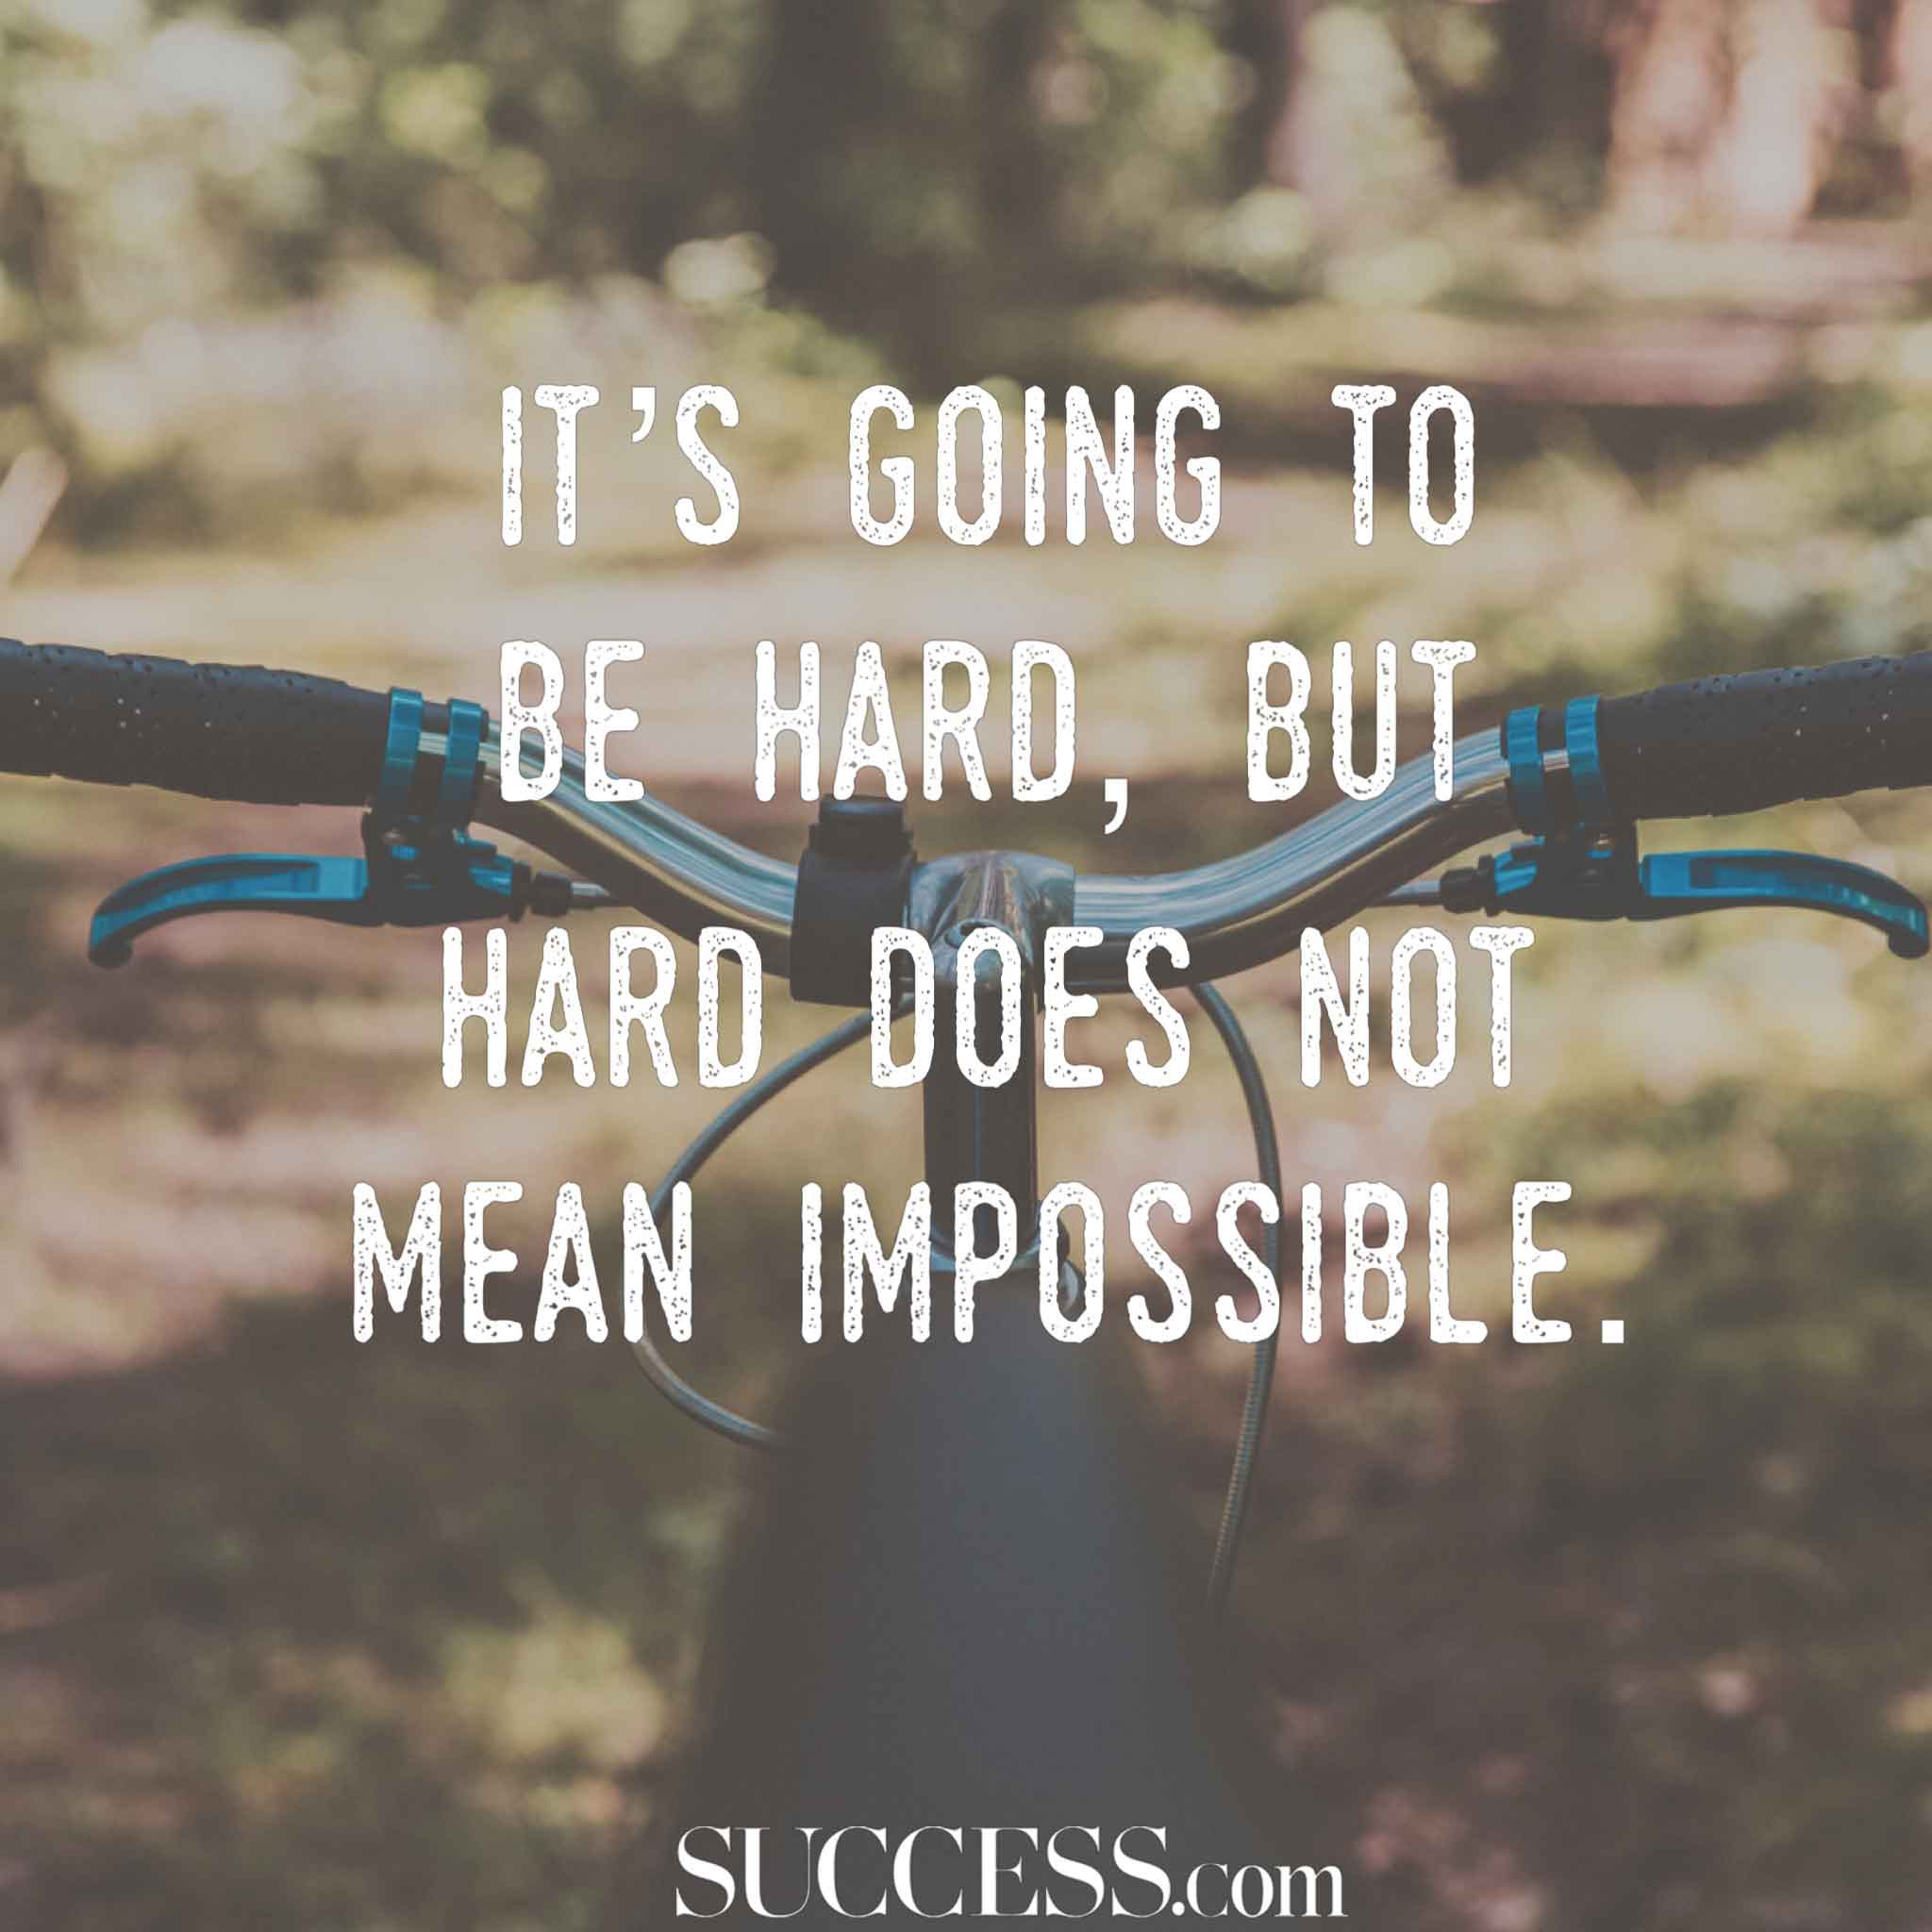 it’s going to be hard, but hard does not mean impossible.